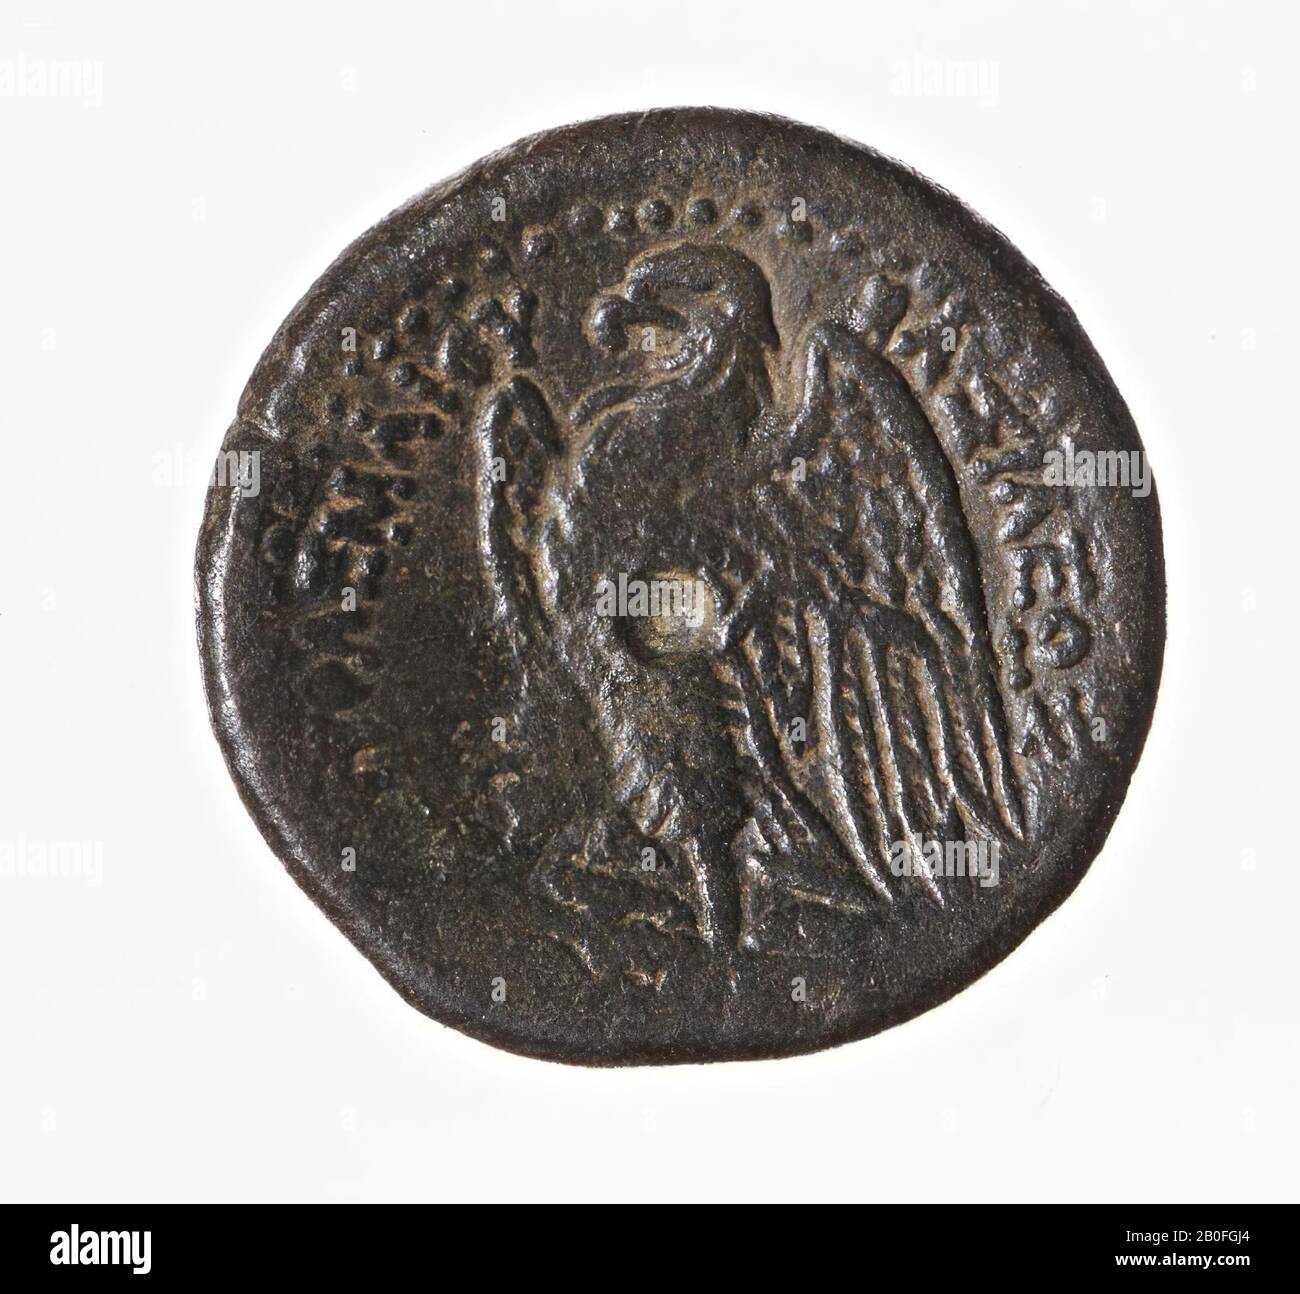 Egypt, coin, aes-24, Ptolemy II, metal, copper, Diam., 22 mm, wt., 11.79 gr, Greco-Roman Period, Ptolemaic Period BC 267, Egypt Stock Photo